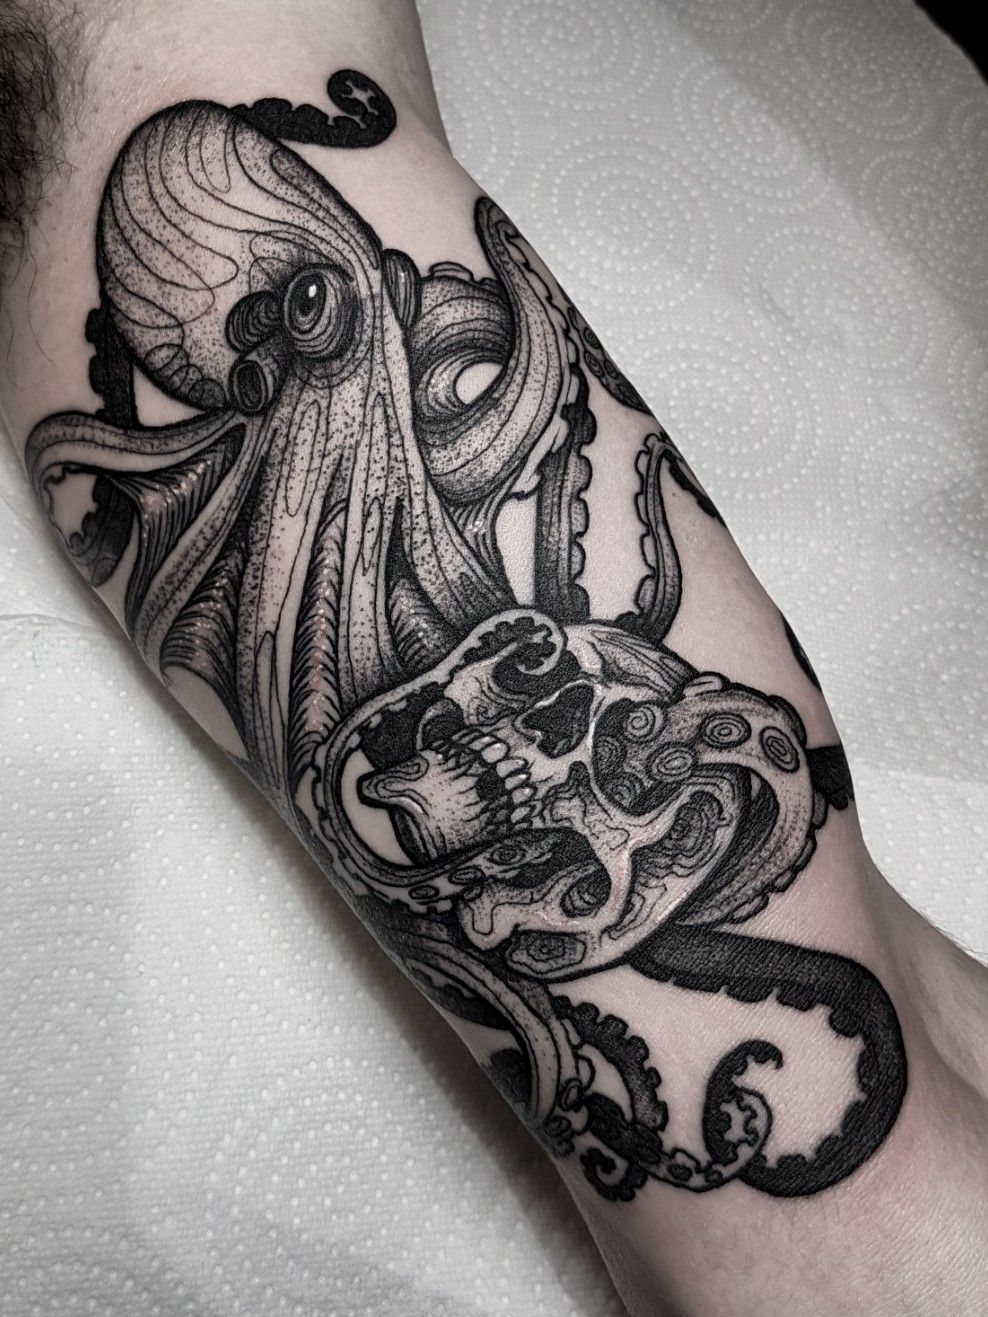 30 Gorgeous Octopus Skull Tattoos to Inspire You  Xuzinuo  Page 8